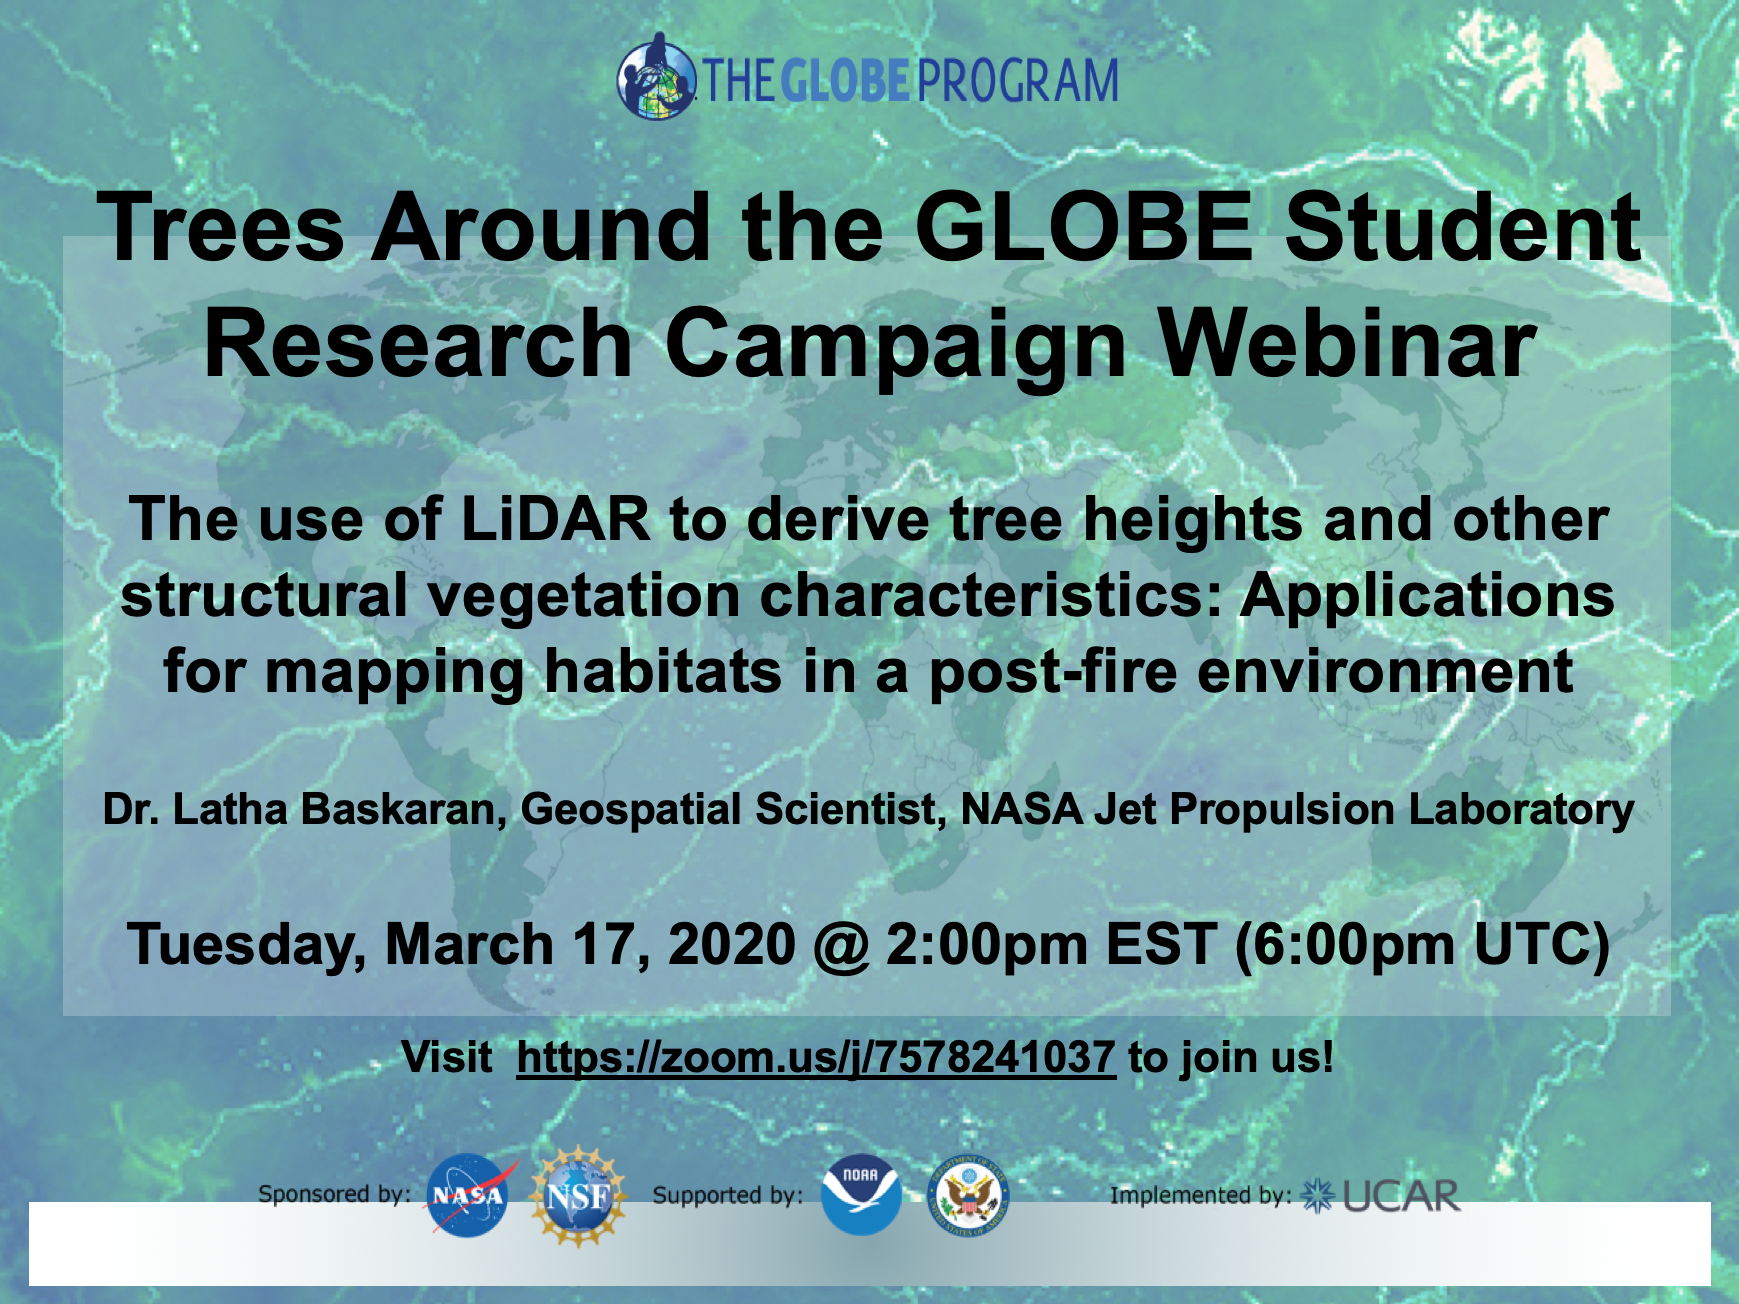 Trees Around the GLOBE 17 March webinar shareable